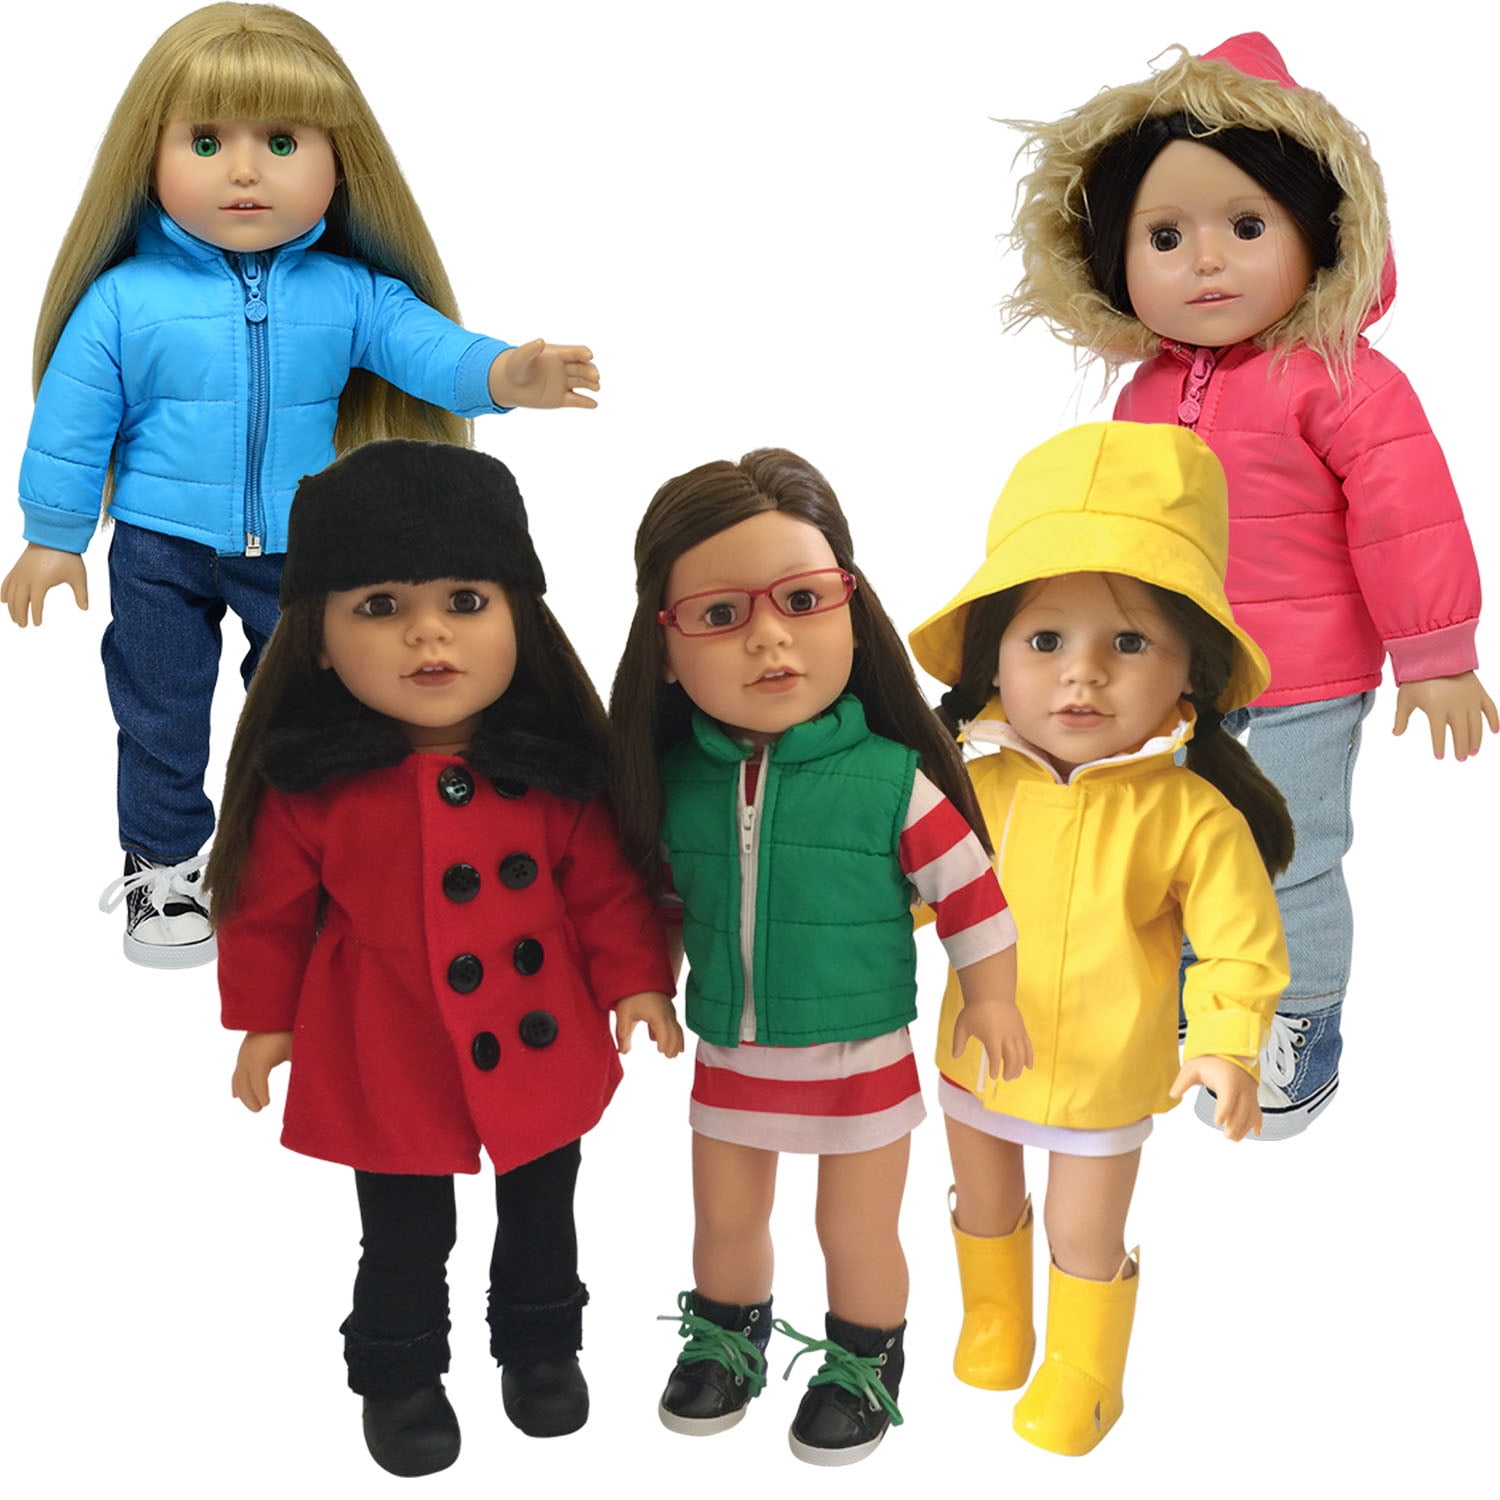 18" Doll Jogging Suit fits 18 inch American Girl Doll Clothes 150d